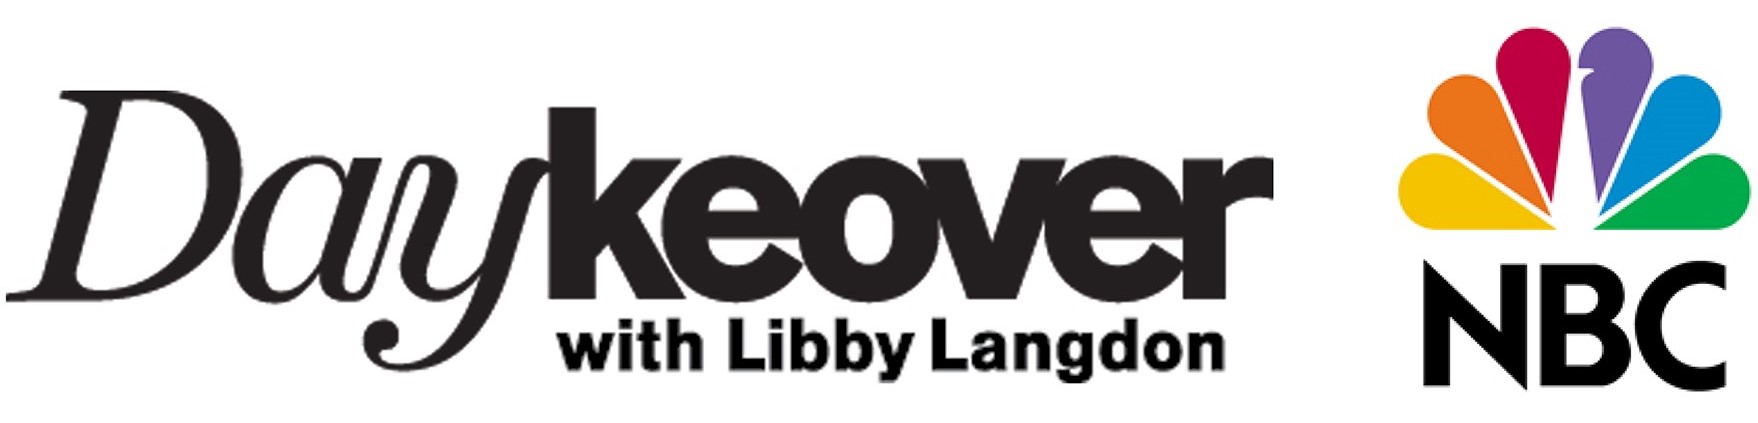 Daykeover with Libby Langdon NBC Logo